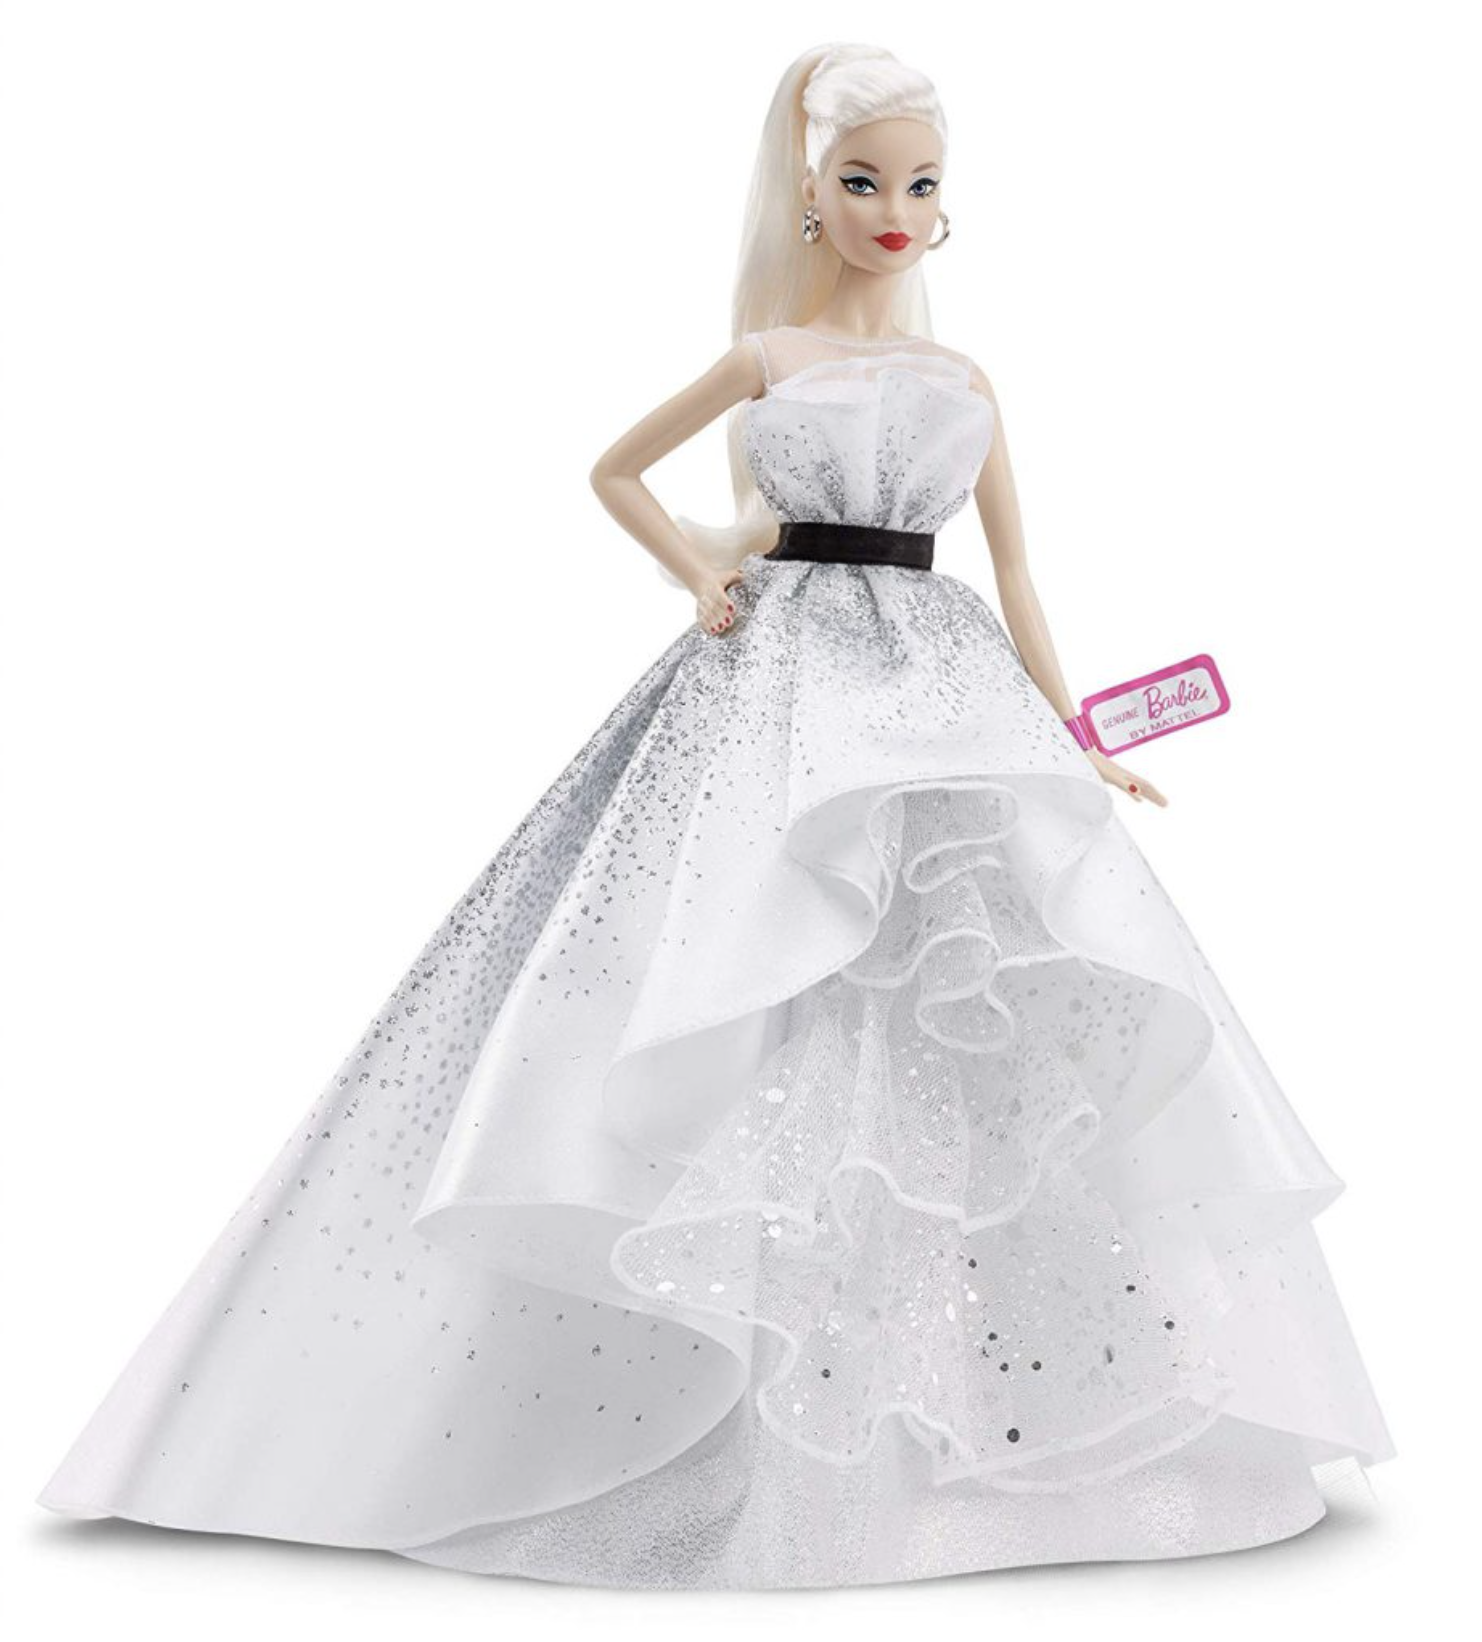 Celebrate Barbie’s 60th Anniversary with this Limited Edition Doll